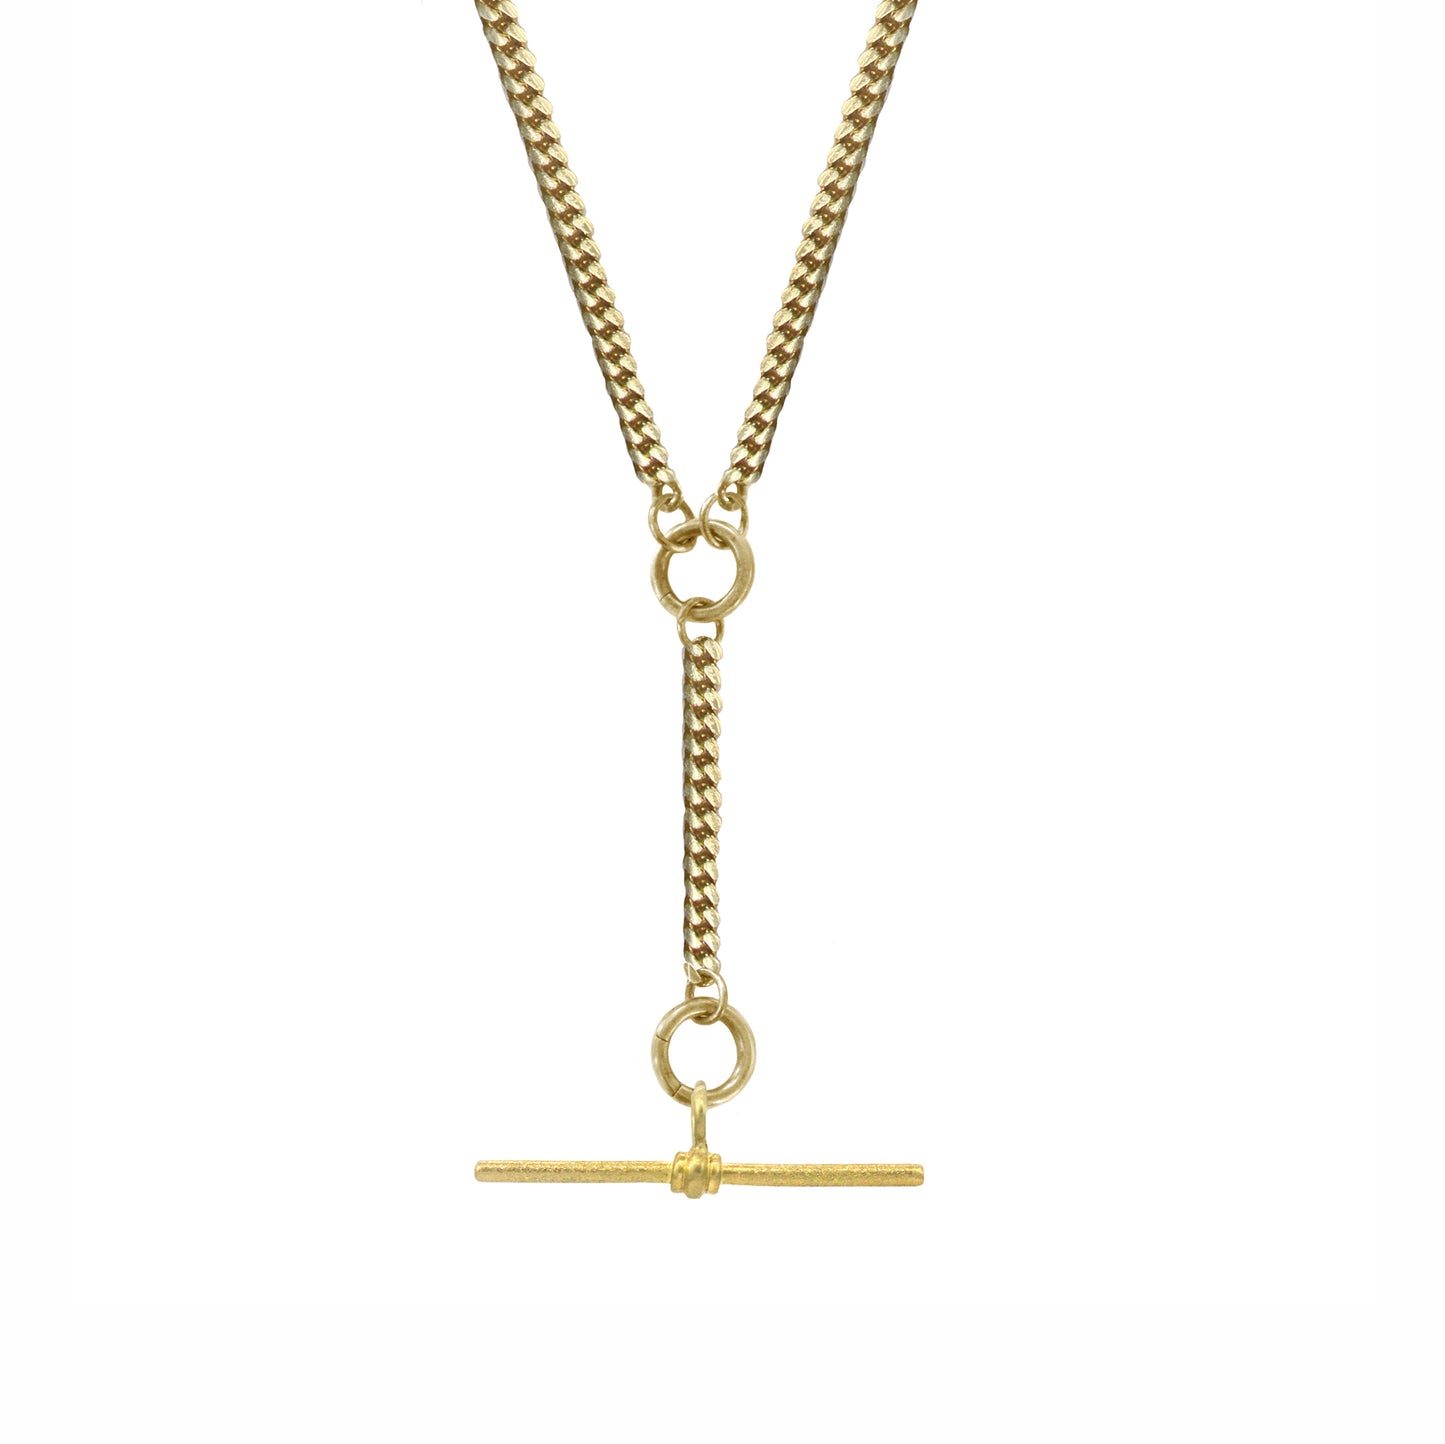 Double Charm Holder Necklace in Gold